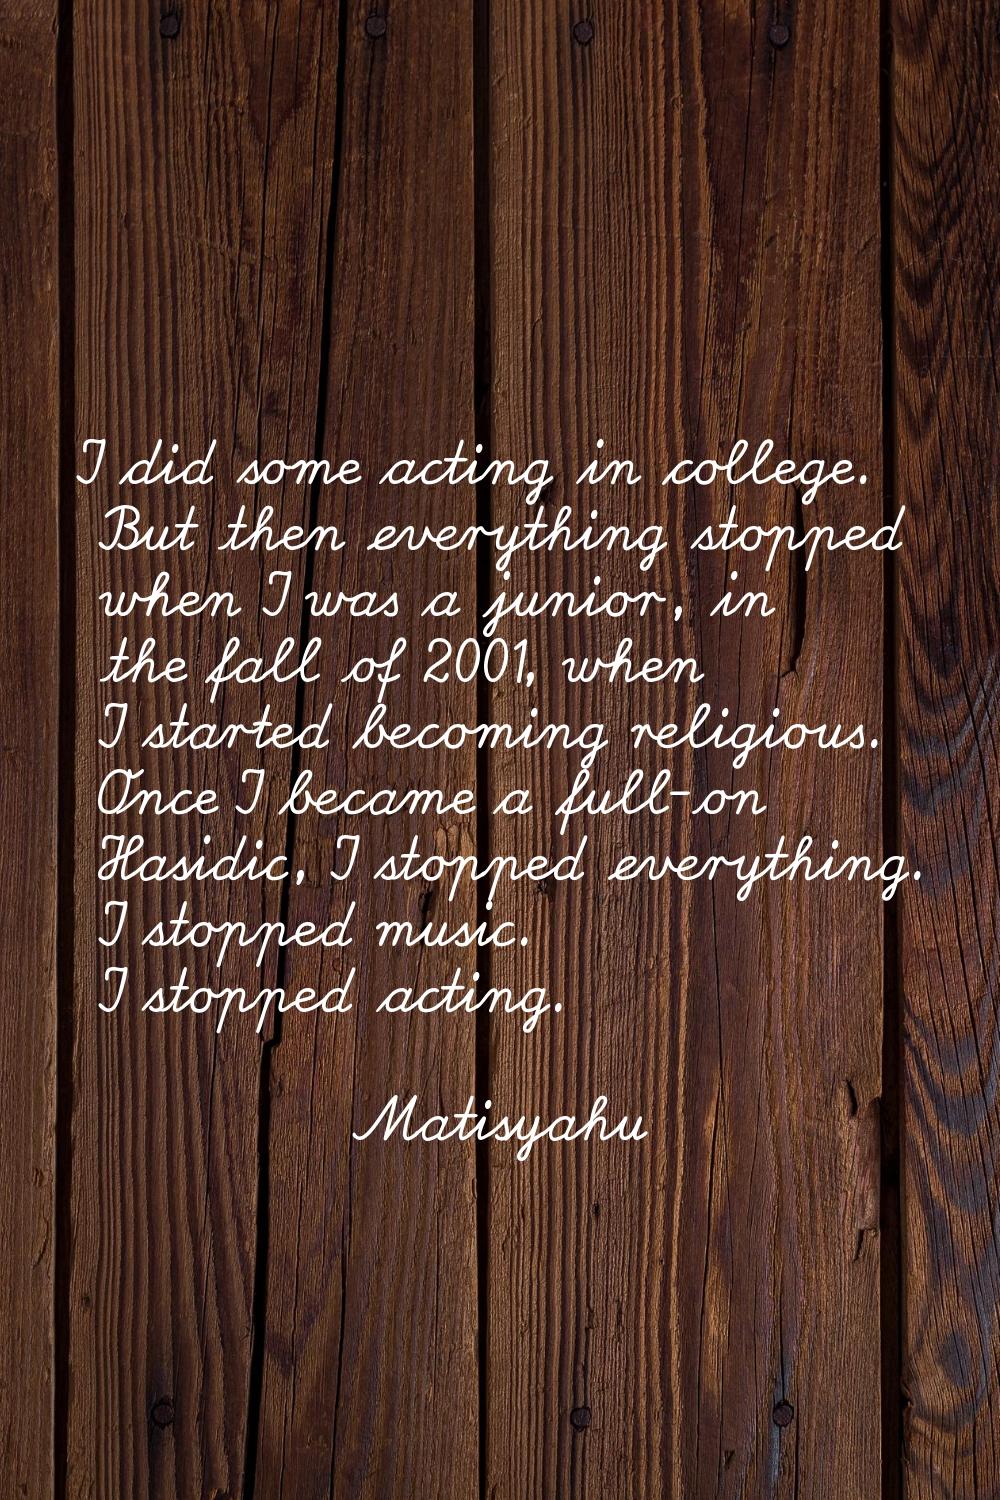 I did some acting in college. But then everything stopped when I was a junior, in the fall of 2001,